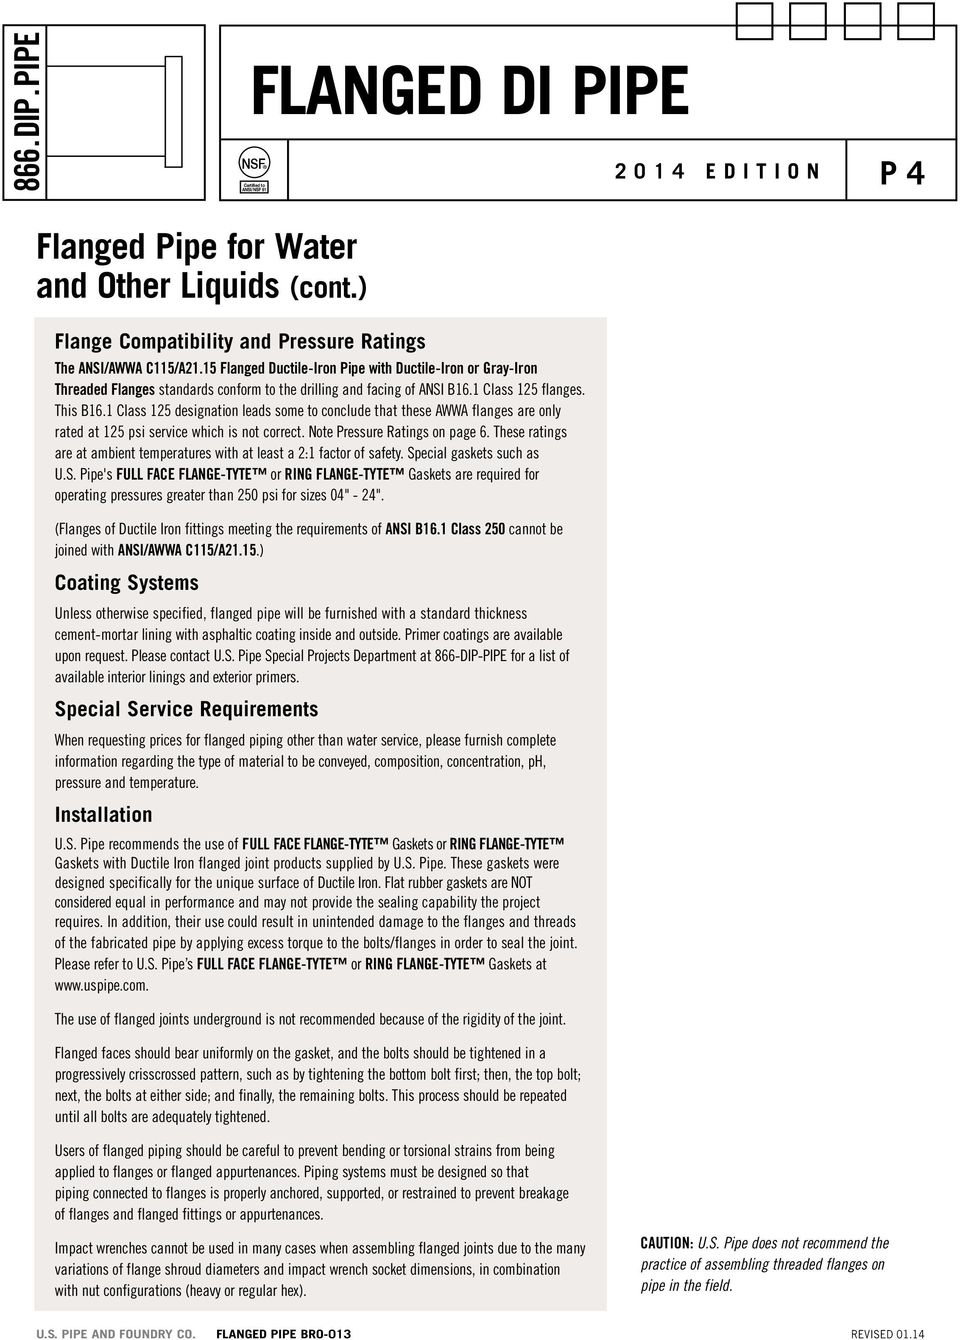 1 Class 125 designation leads some to conclude that these AWWA flanges are only rated at 125 psi service which is not correct. Note ressure Ratings on page 6.